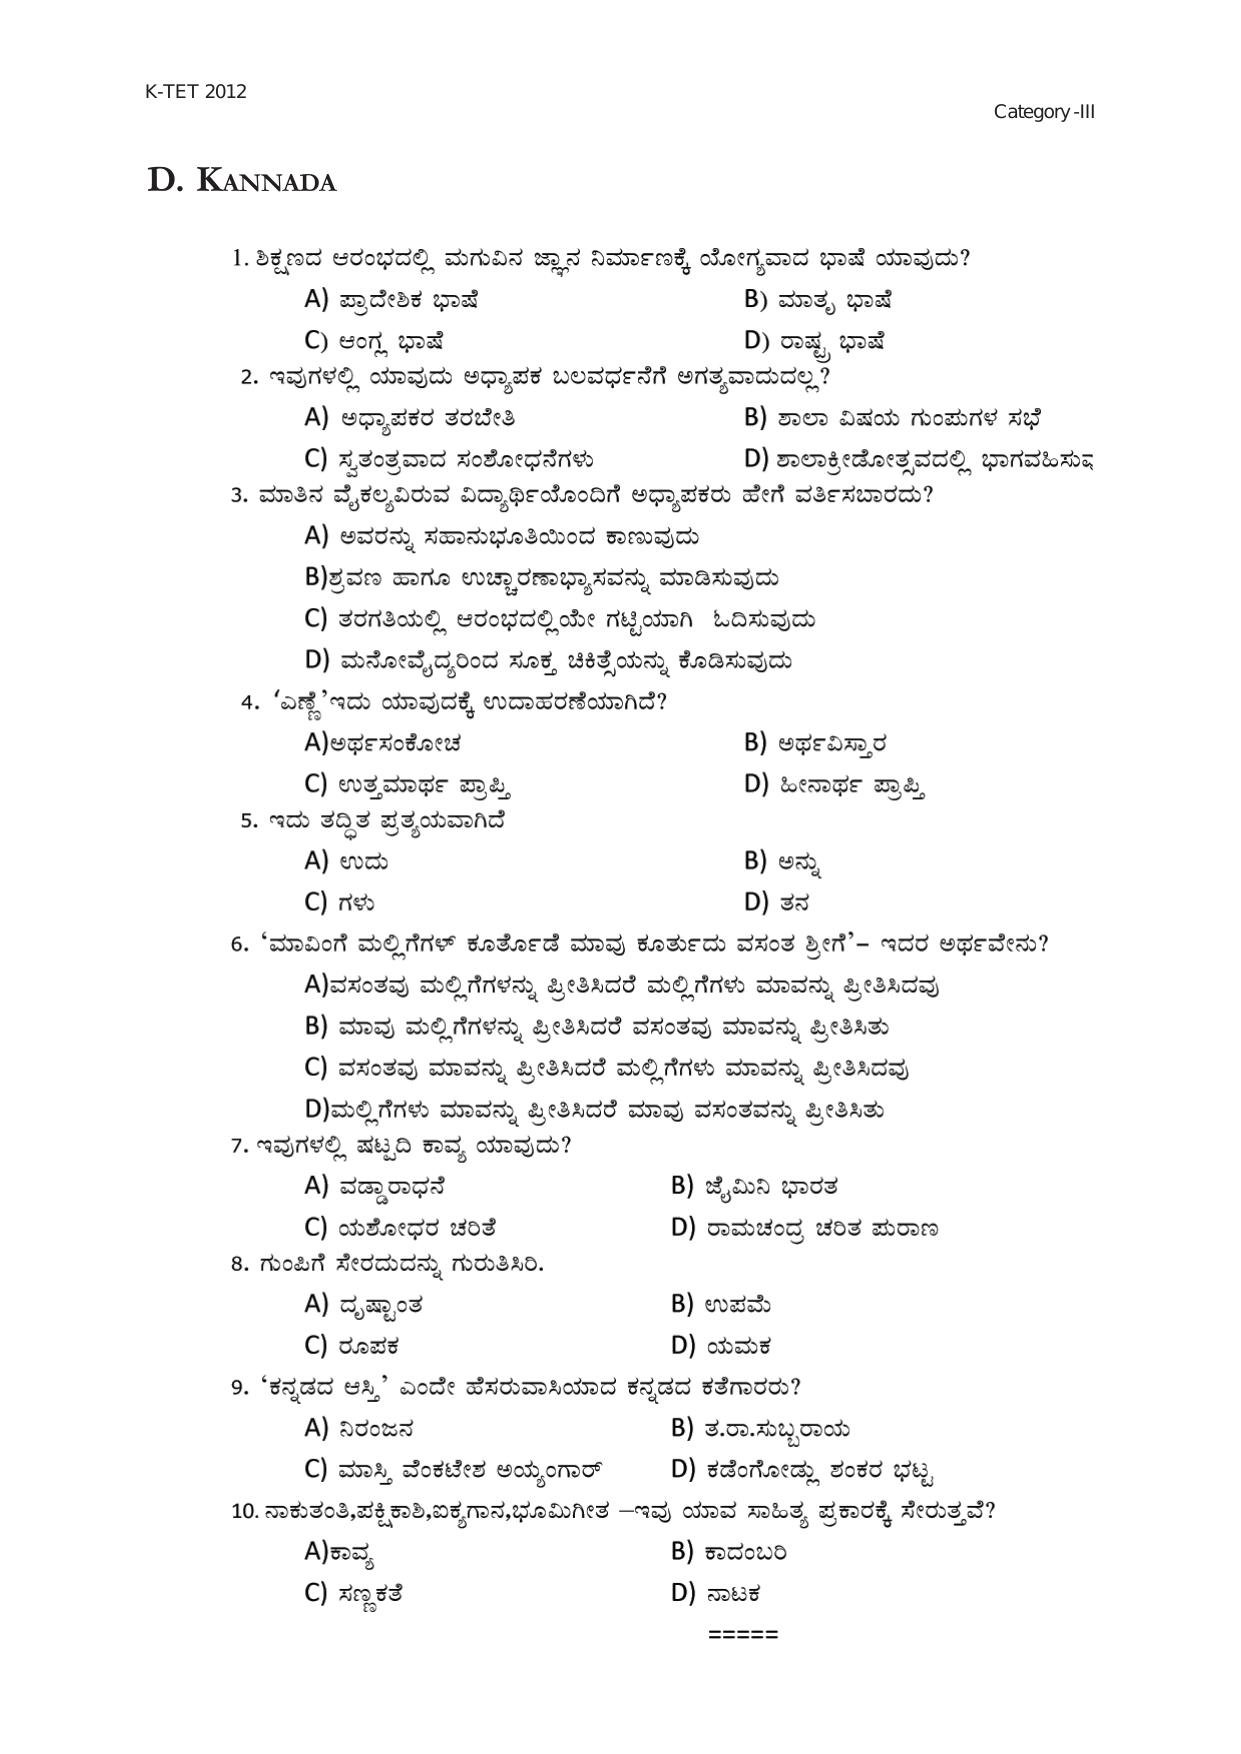 KTET Category III High School Teacher (8 to 10) Exam Previous Papers - Page 15